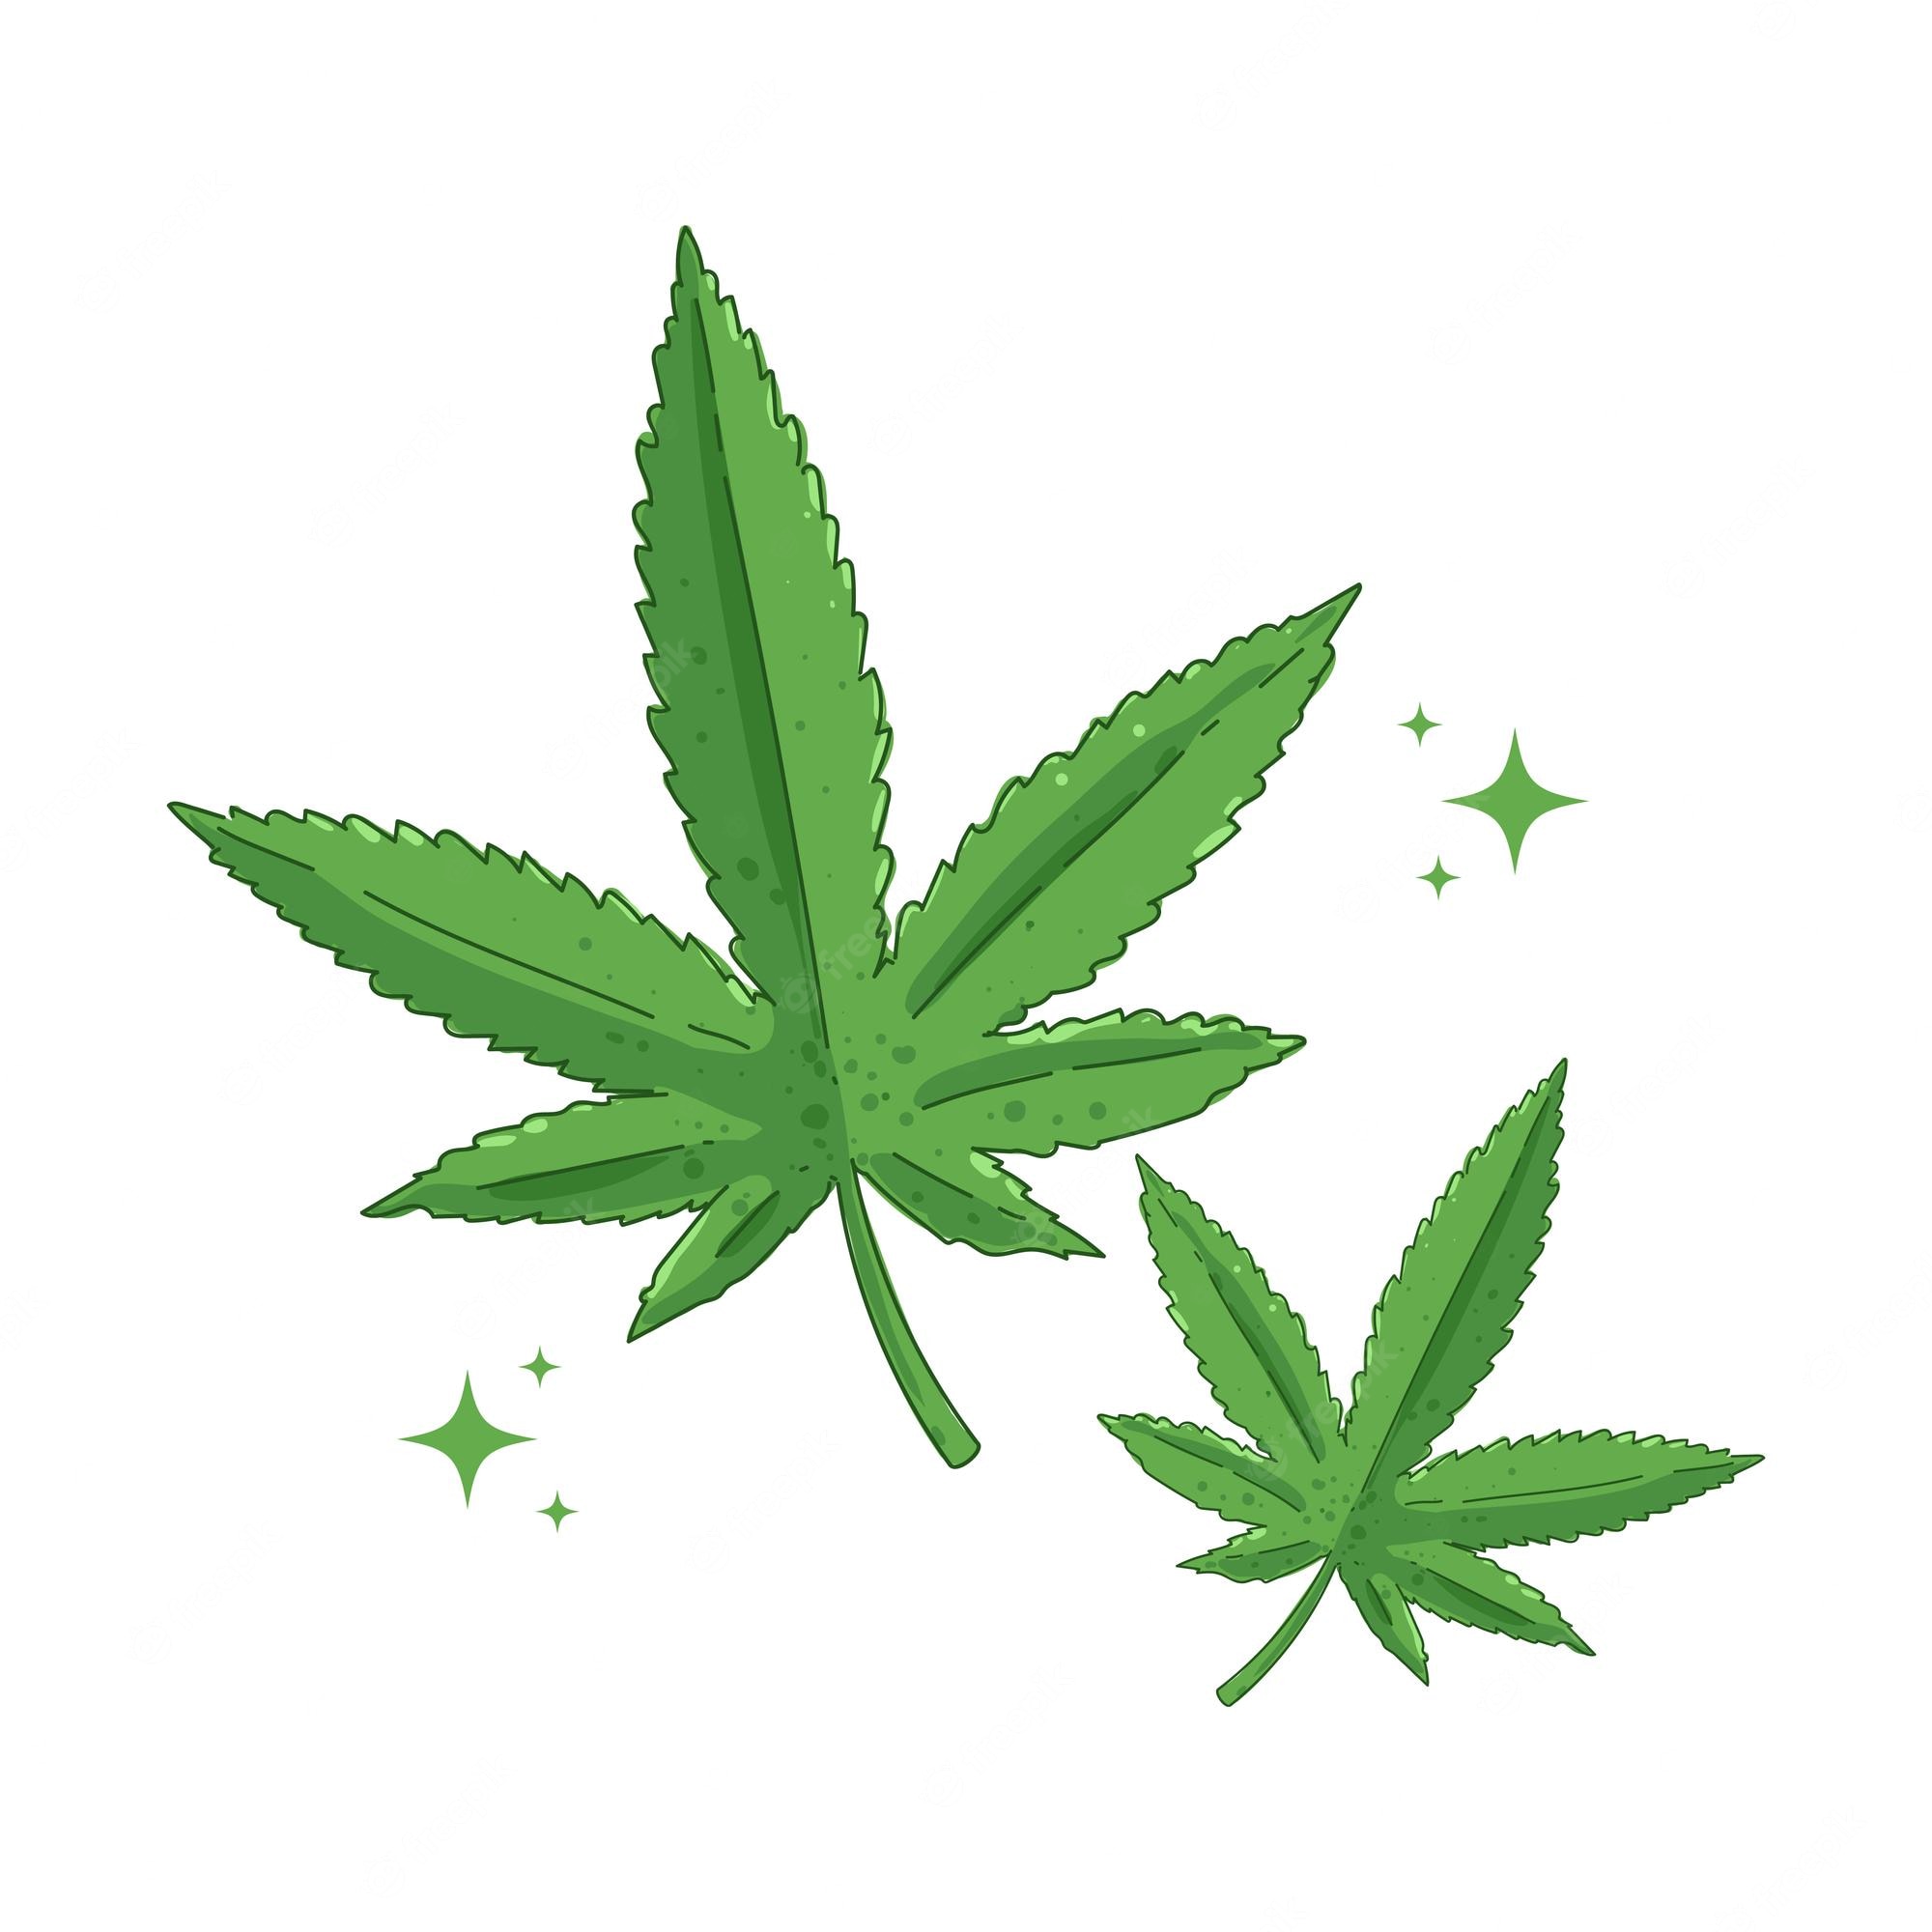 Weed Plants Backgrounds